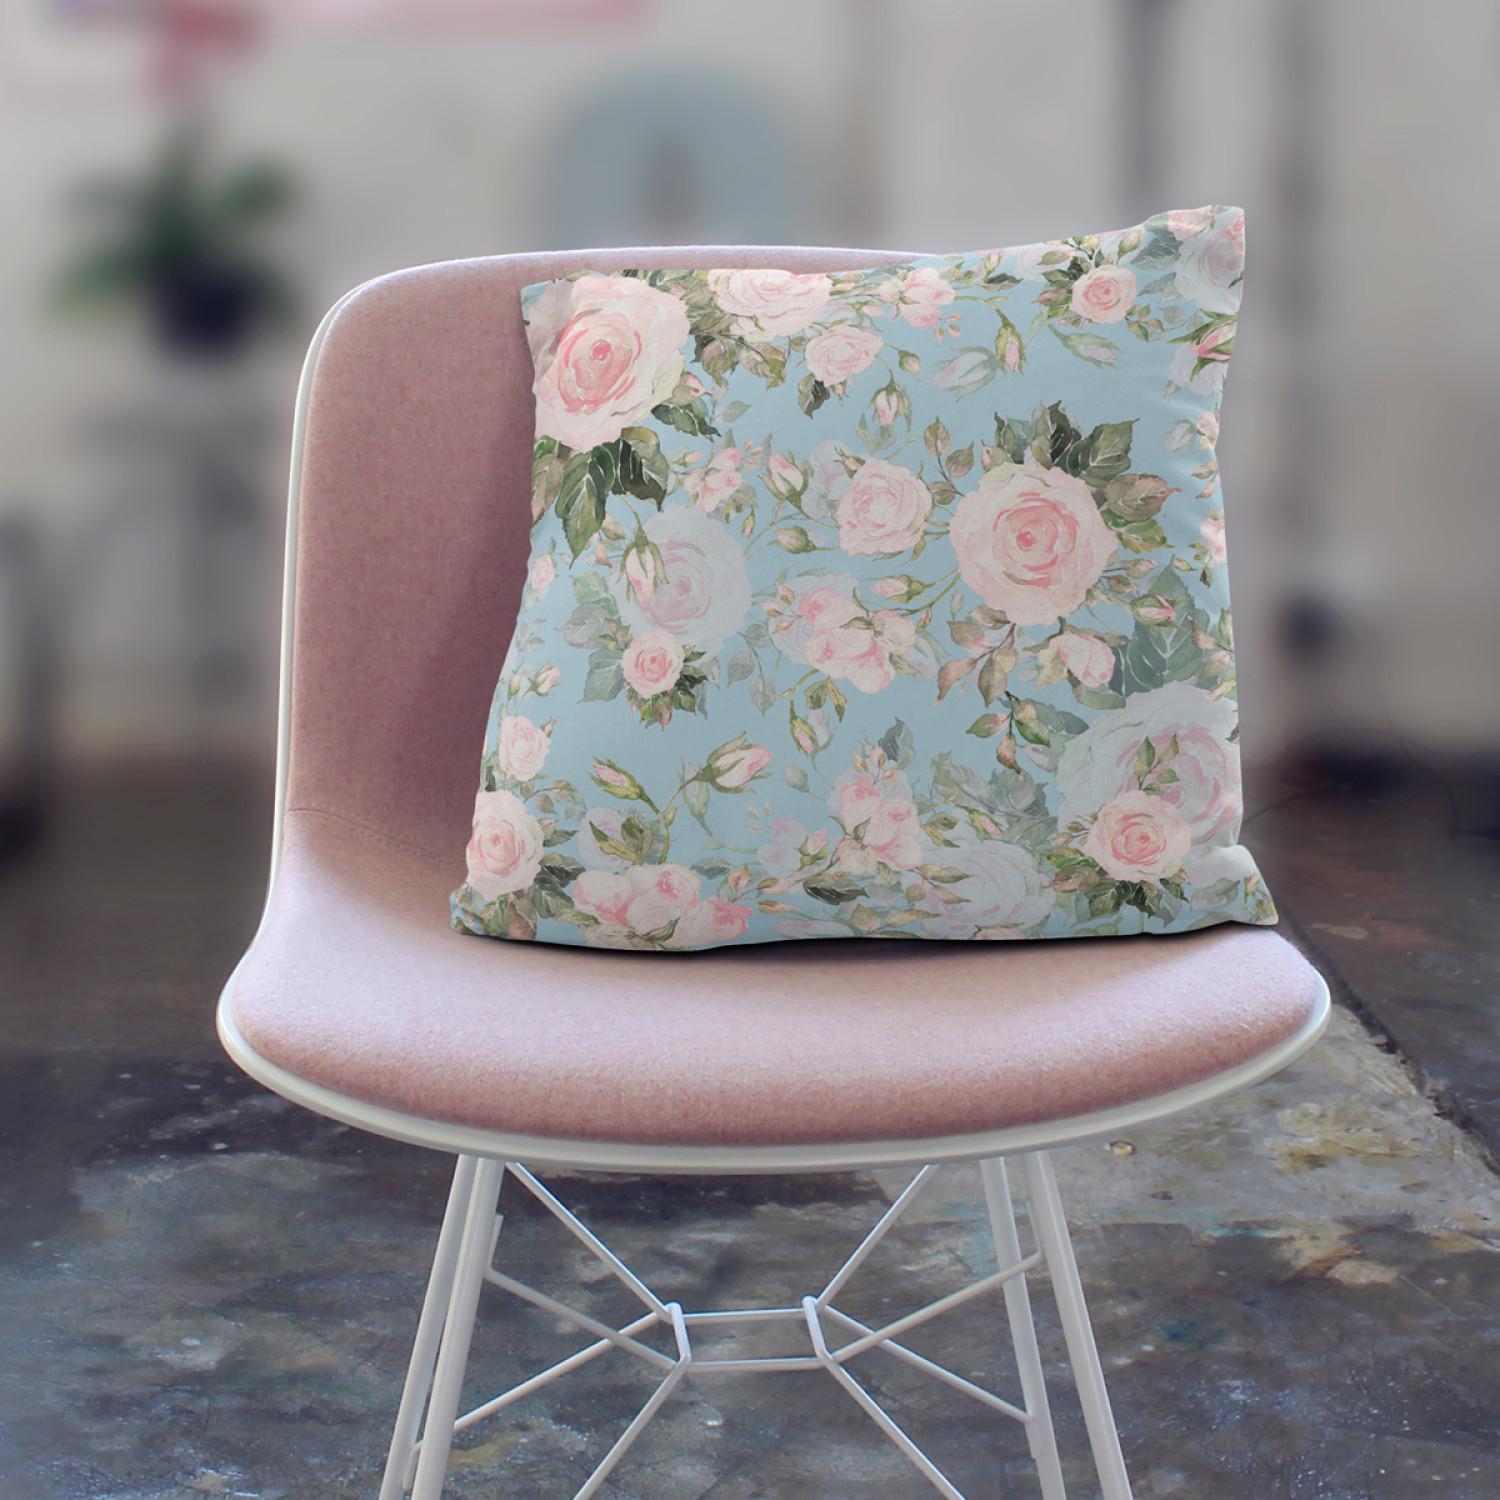 Decorative Microfiber Pillow Elusive painting - roses in cottagecore style on blue background cushions